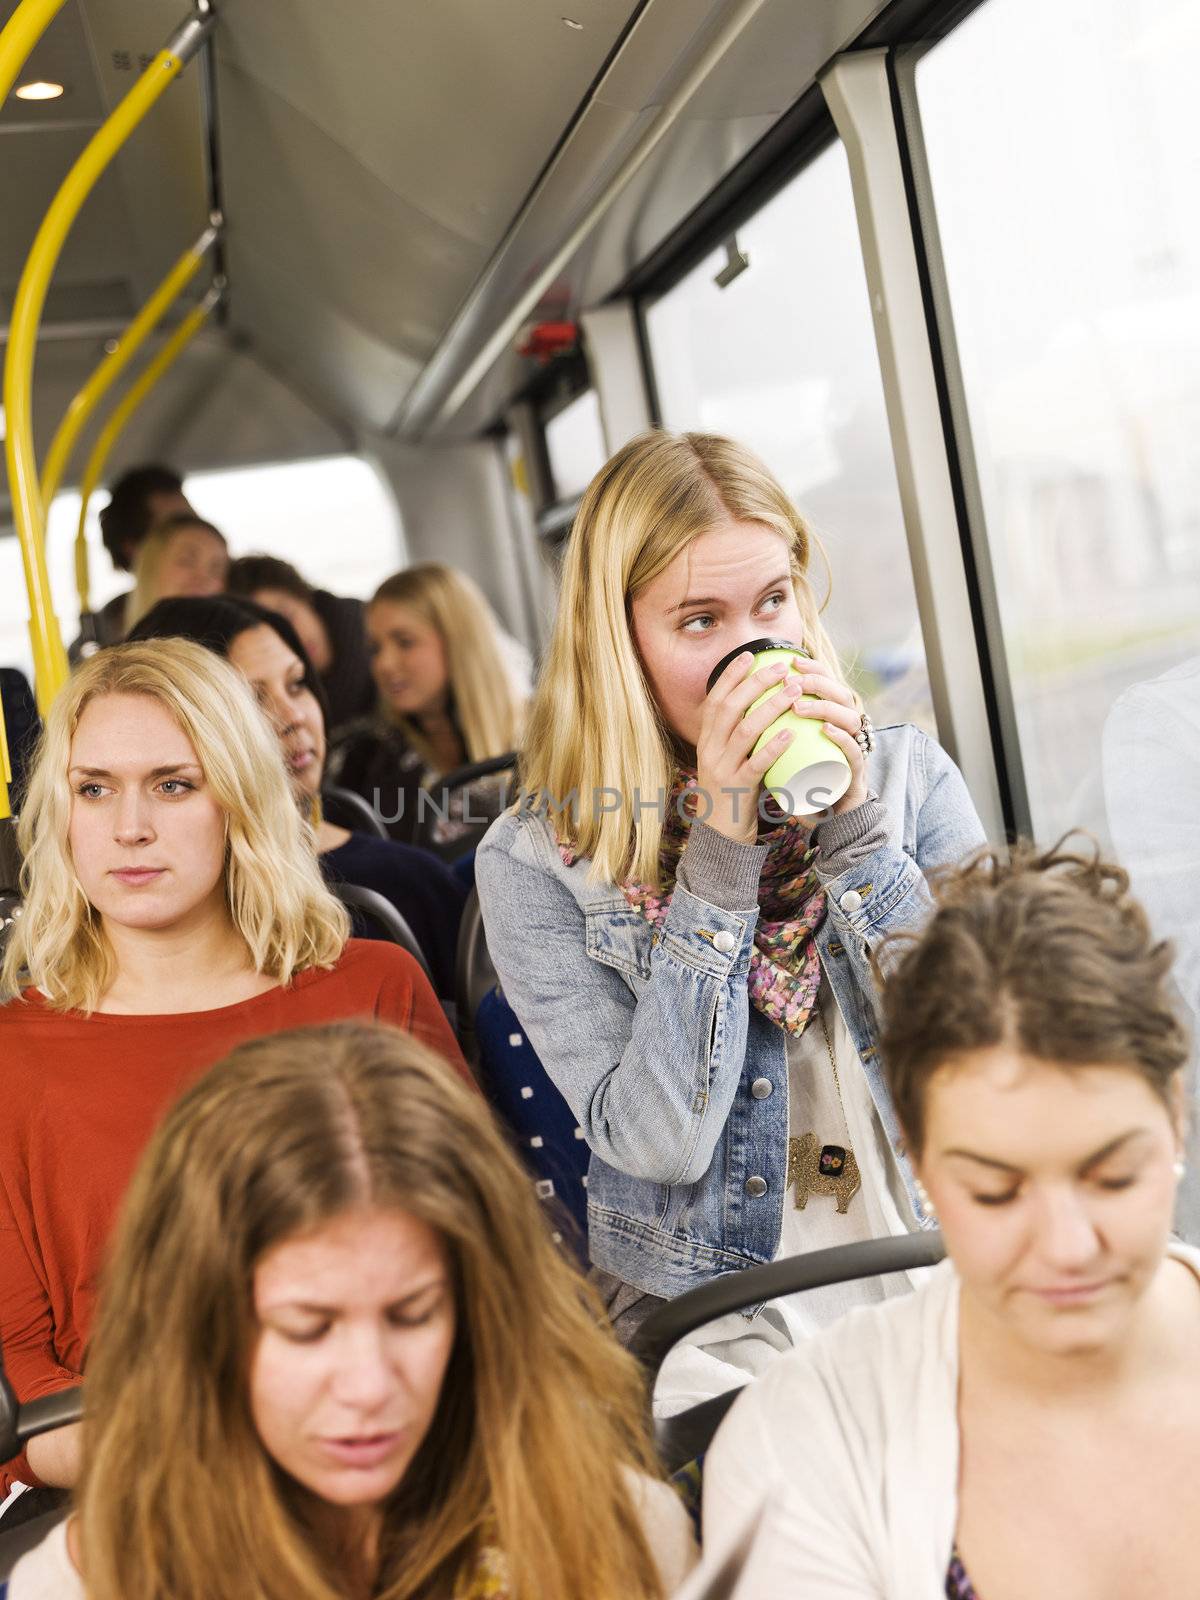 Woman drinking coffee on the bus